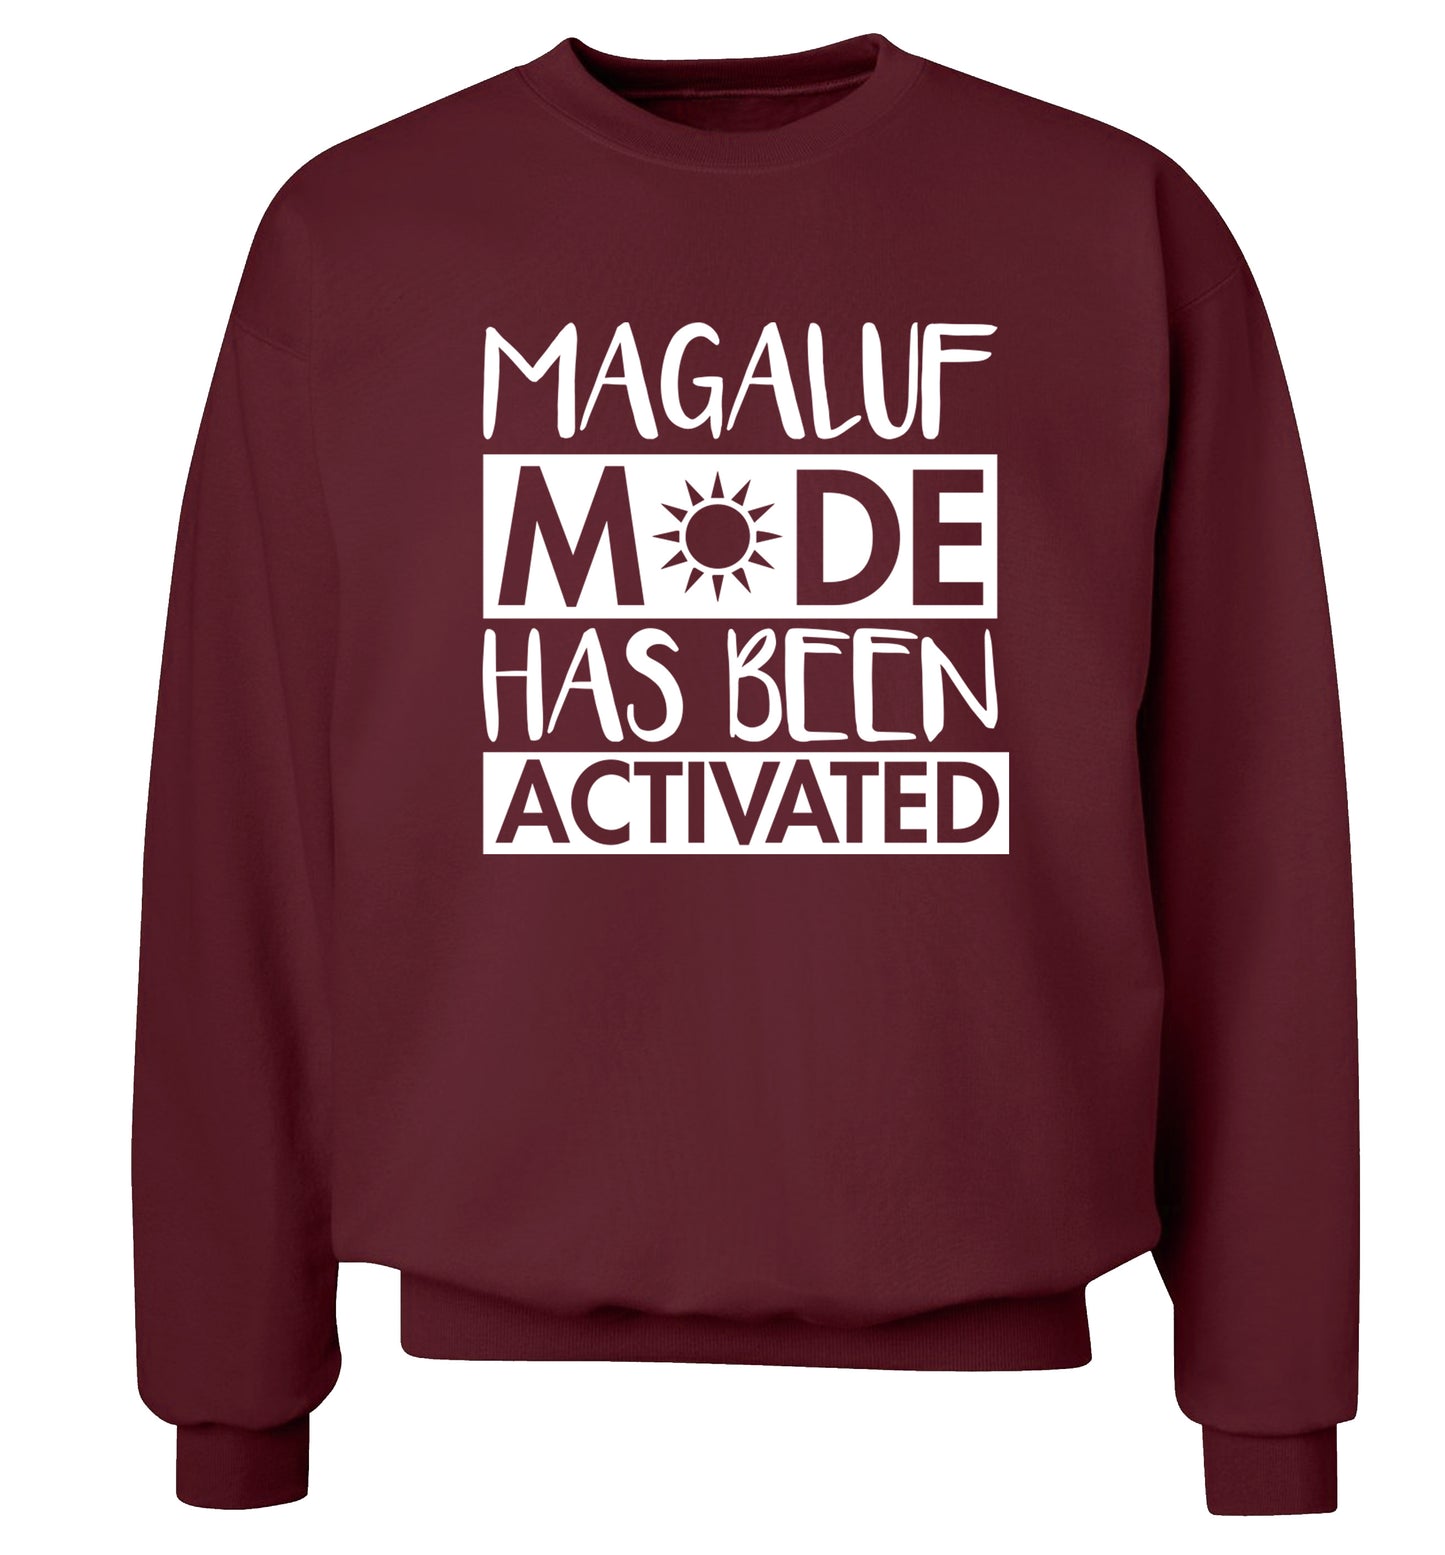 Magaluf mode has been activated Adult's unisex maroon Sweater 2XL